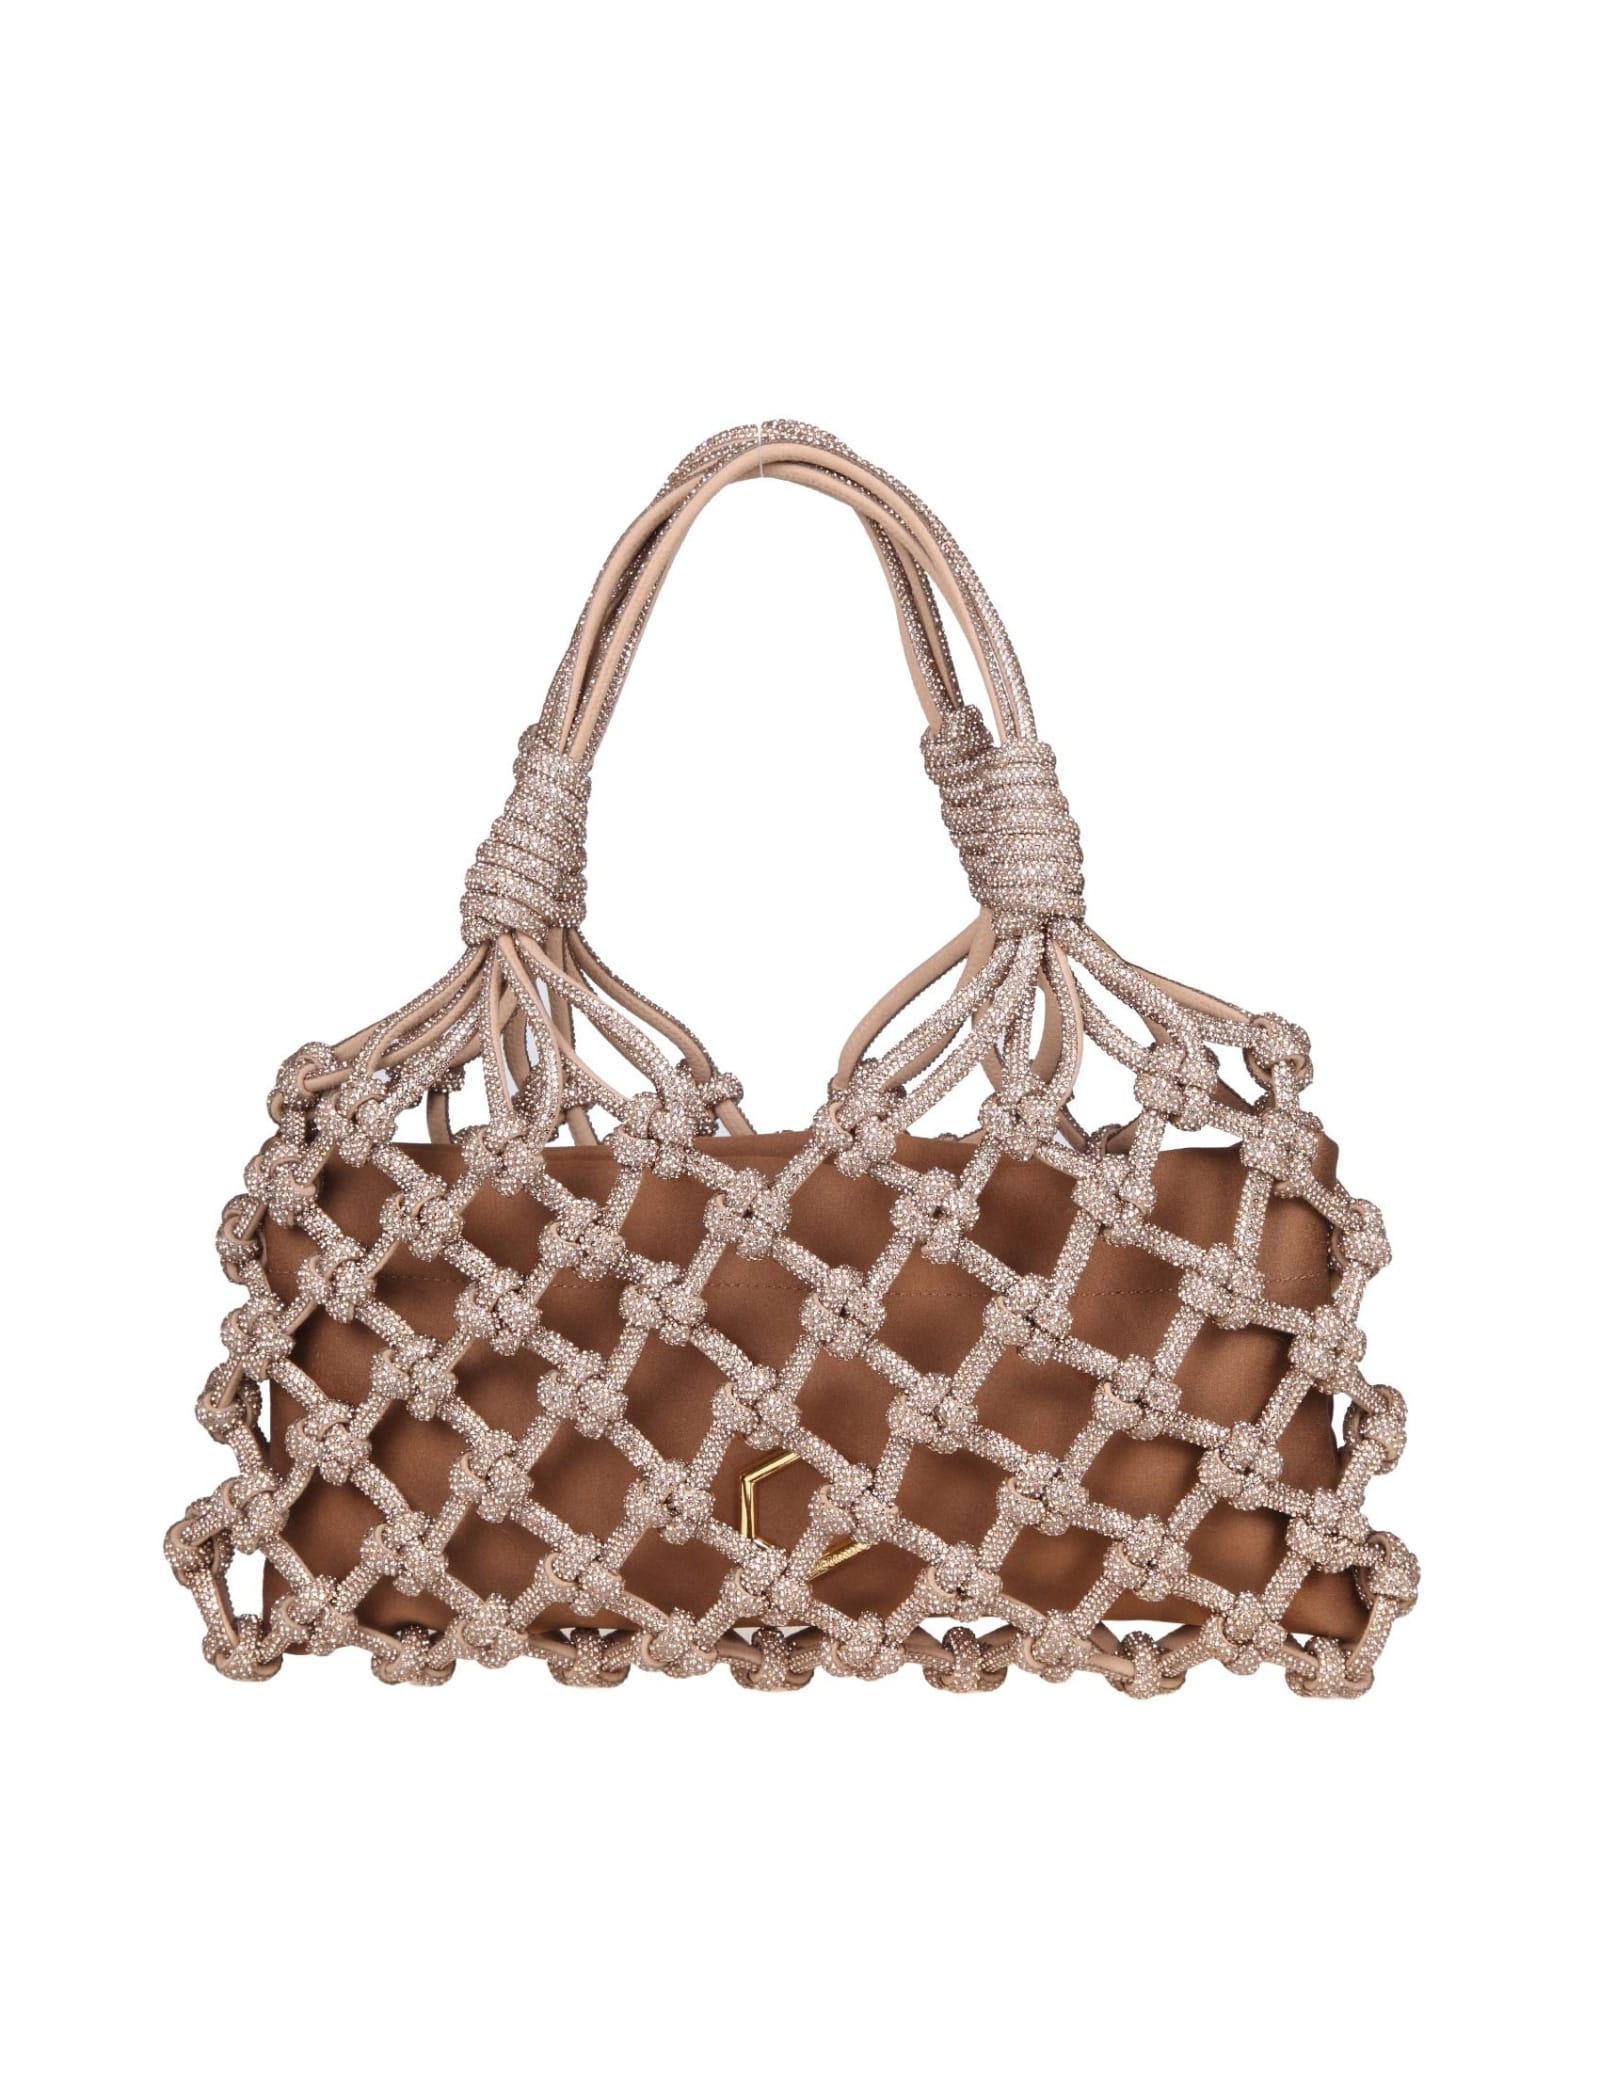 Lola Baguette Jewel Bag Woven With Crystals